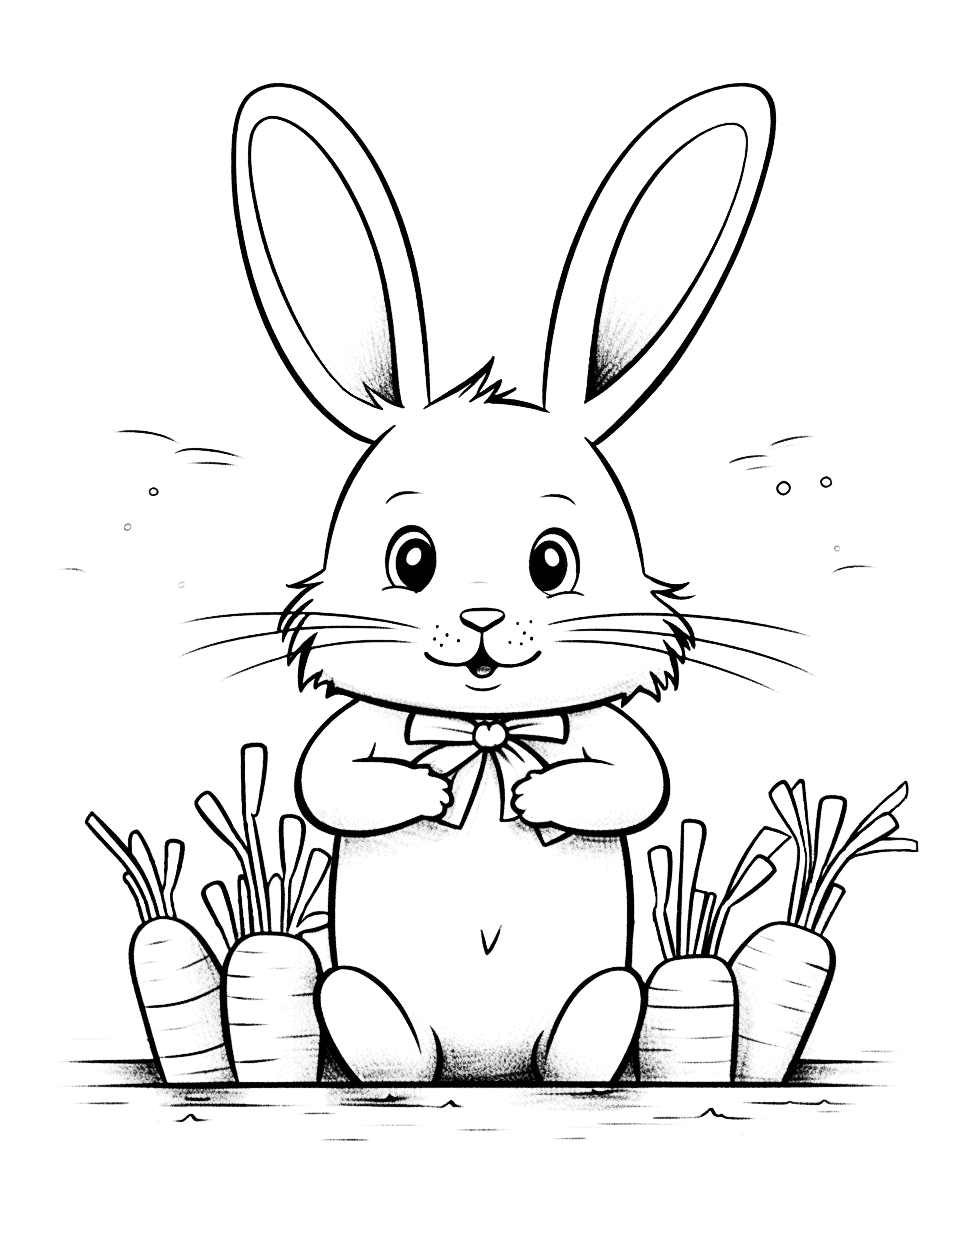 Bunny with Carrots Easter Coloring Page - A bunny holding a bunch of carrots showcasing the natural connection between Easter and springtime.